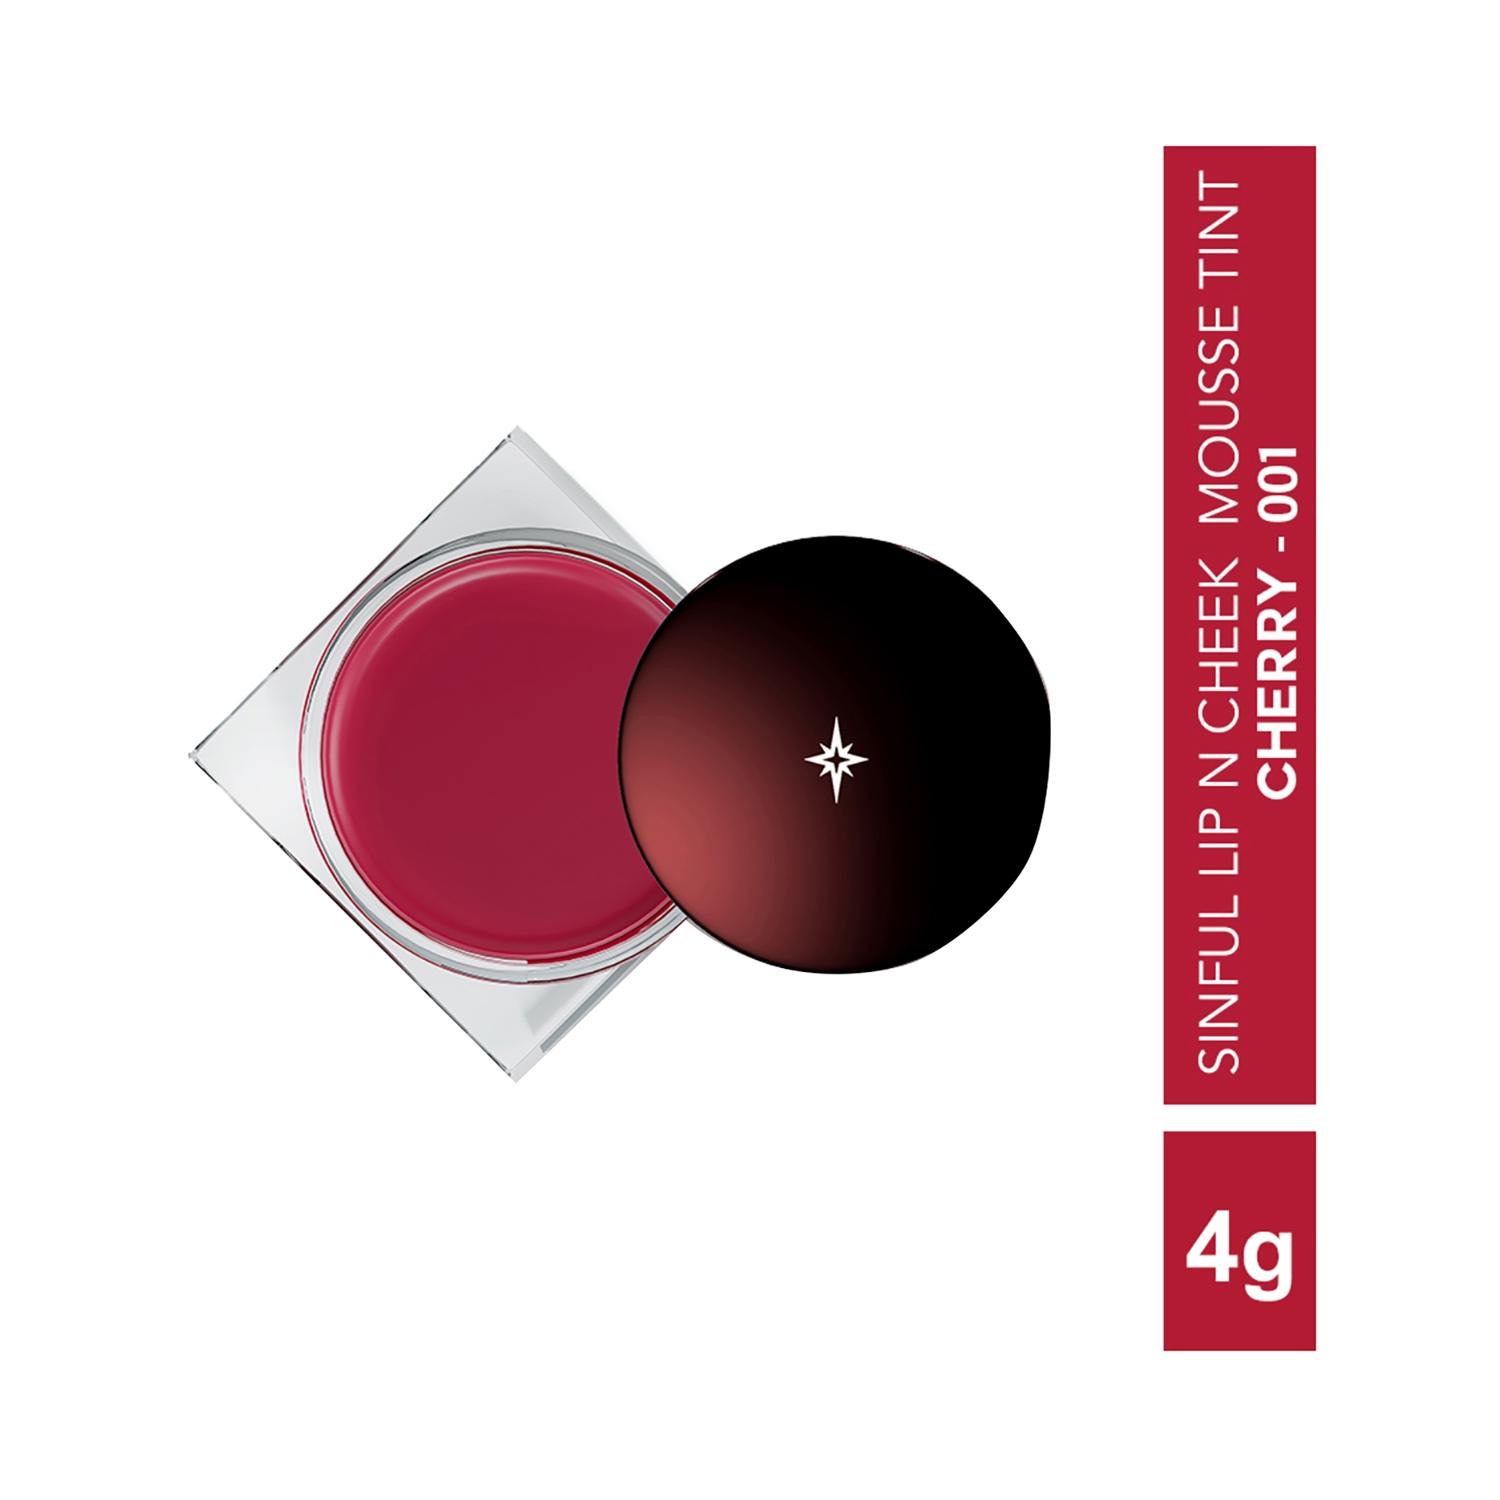 Colorbar | Colorbar Sinful Lip N Cheek Mousse Tint - Cherry-001 (4g)